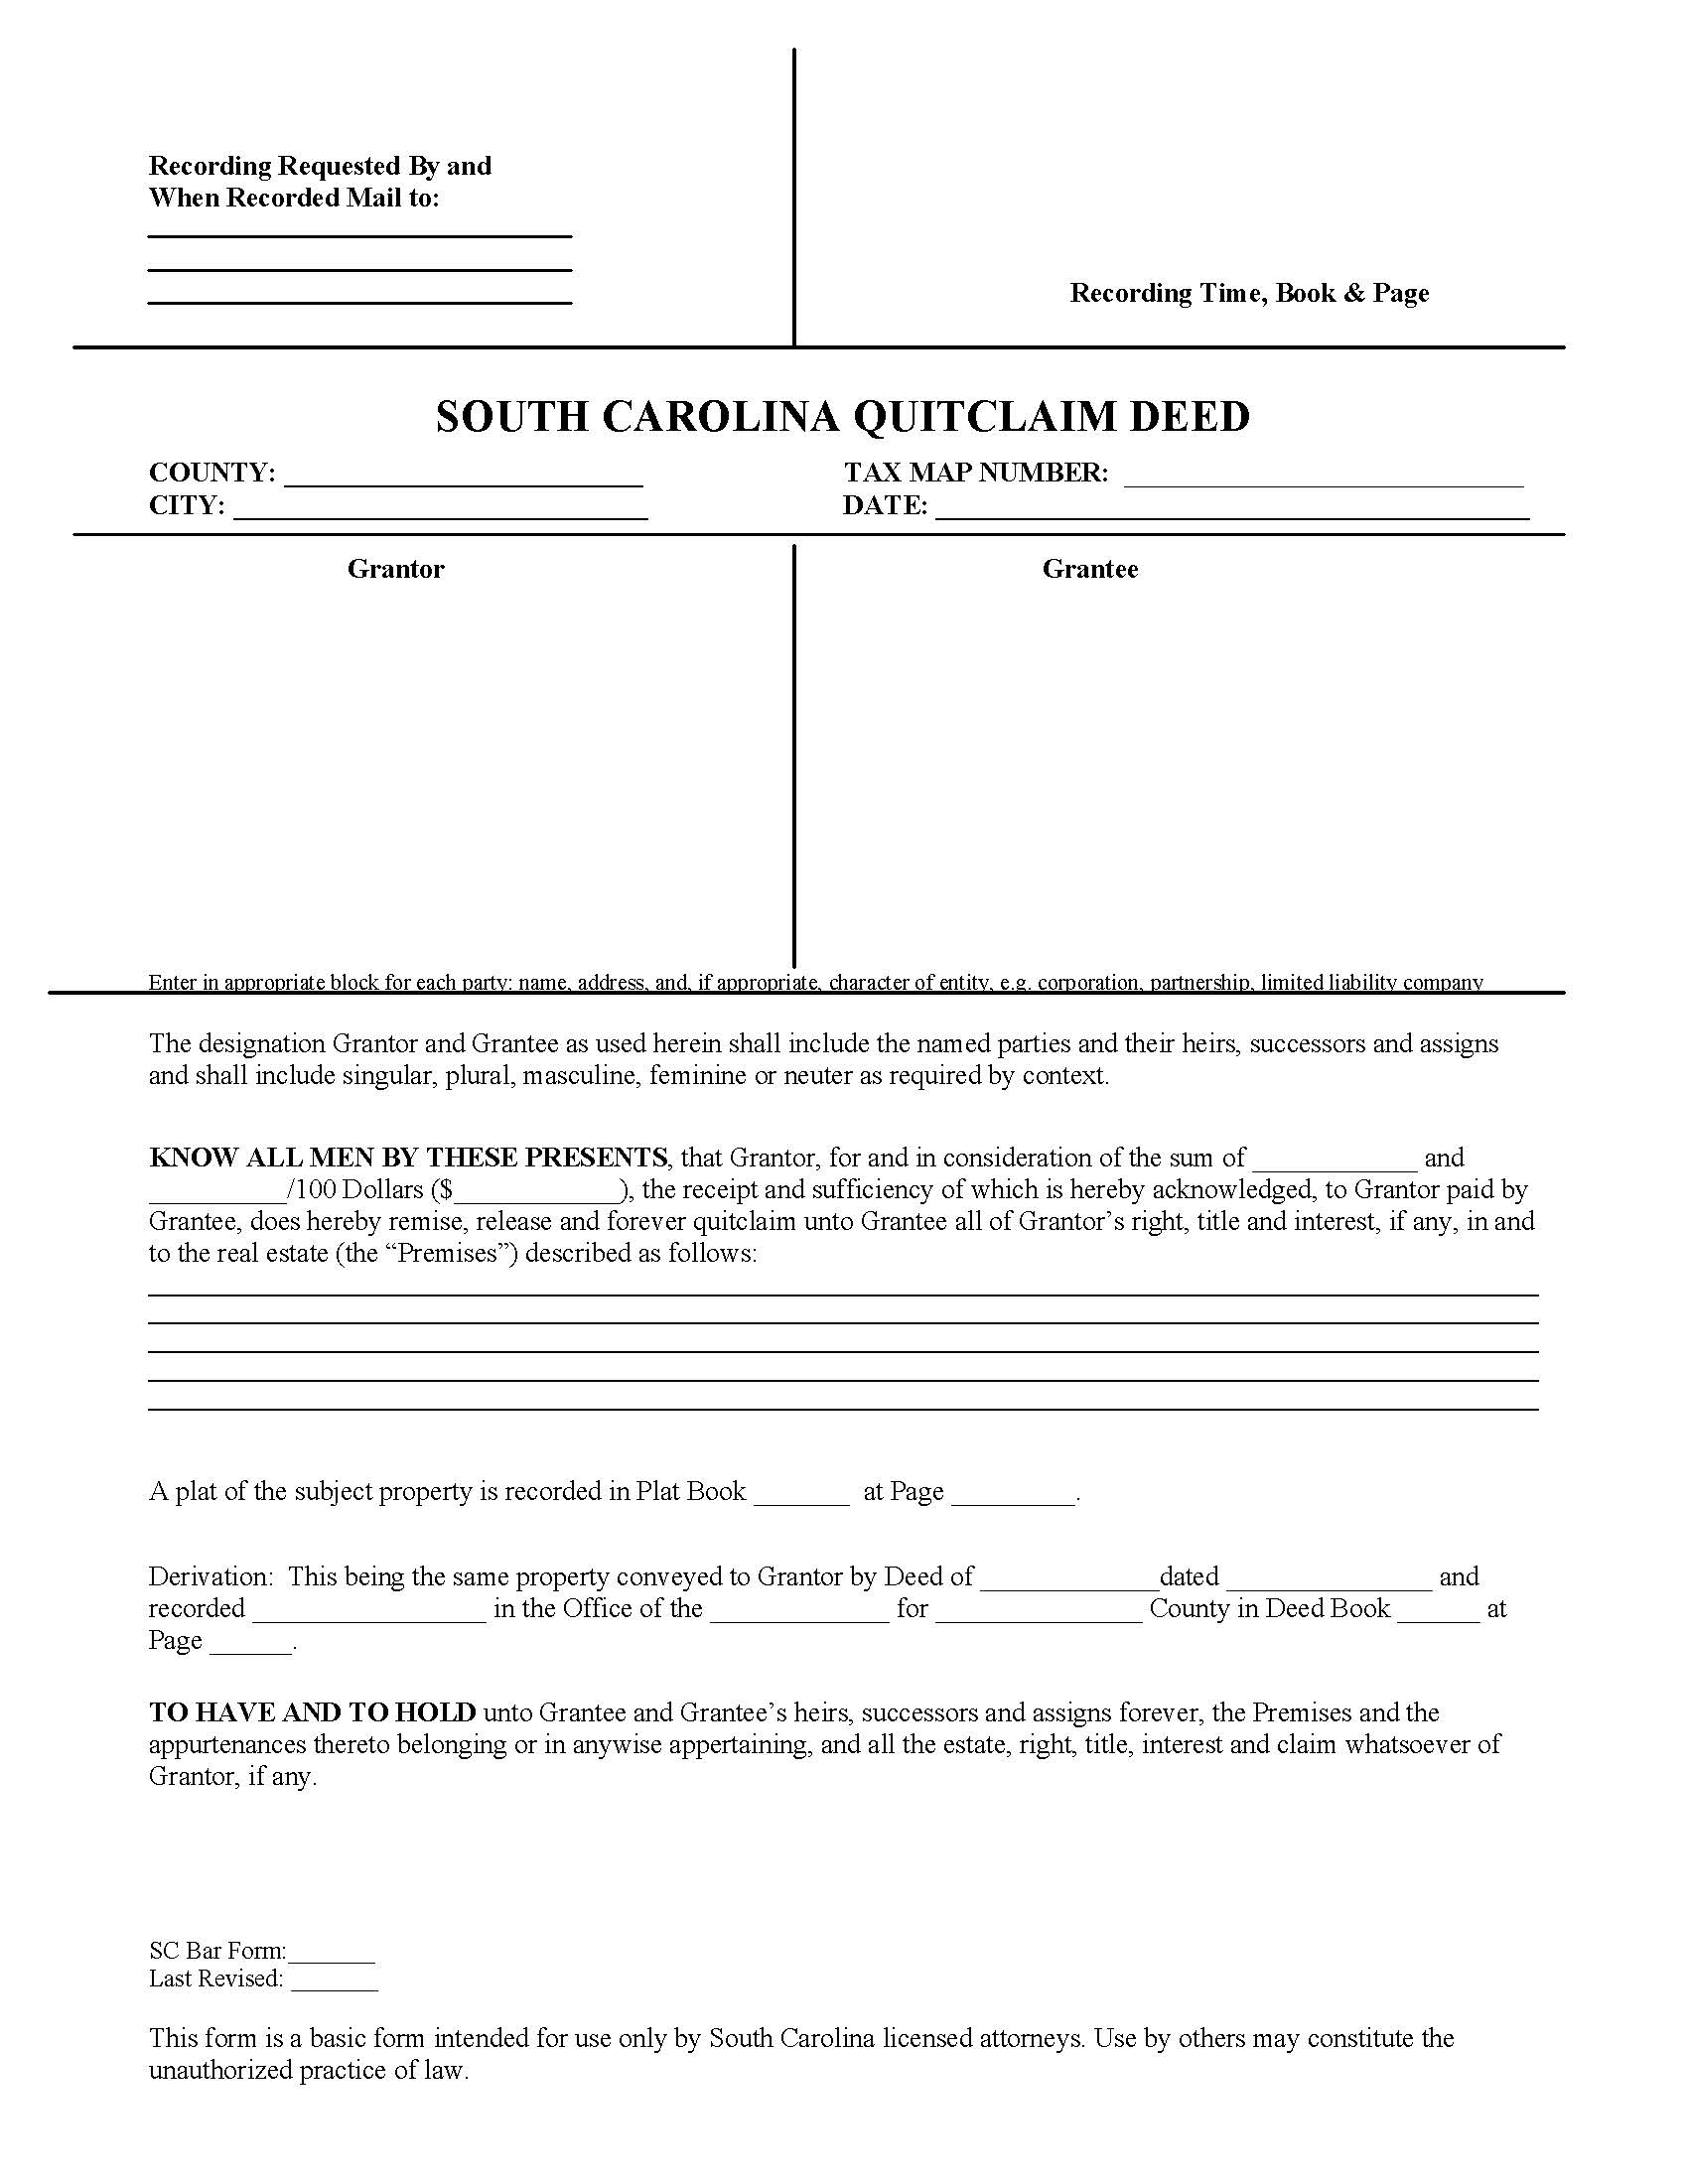 South Carolina Quit Claim Deed Form Deed Forms Deed Forms